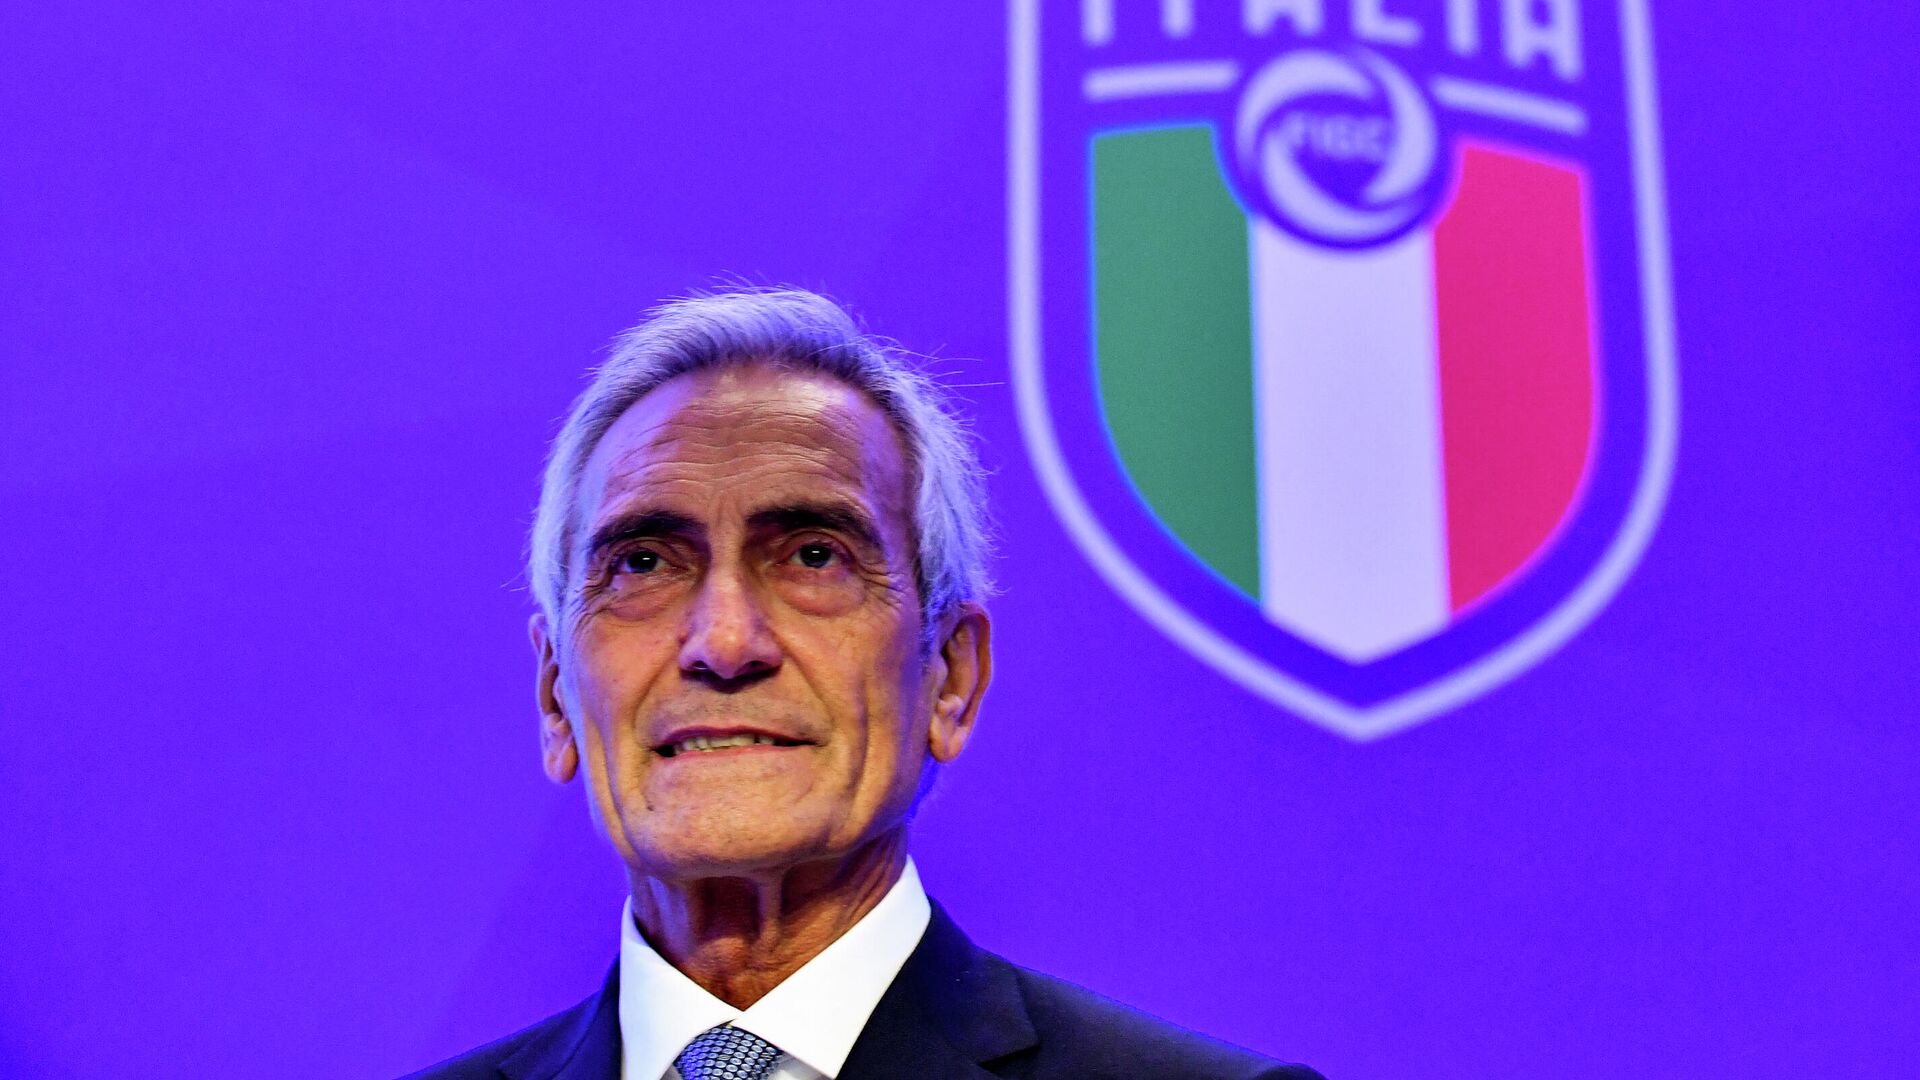 New President of the Italian Football Federation (FIGC), Gabriele Gravina poses with the federation's logo following the vote during the elective assembly of the FIGC on October 22, 2018 at the Hilton hotel of Rome's Fiumicino airport. (Photo by Alberto PIZZOLI / AFP) - РИА Новости, 1920, 22.02.2021